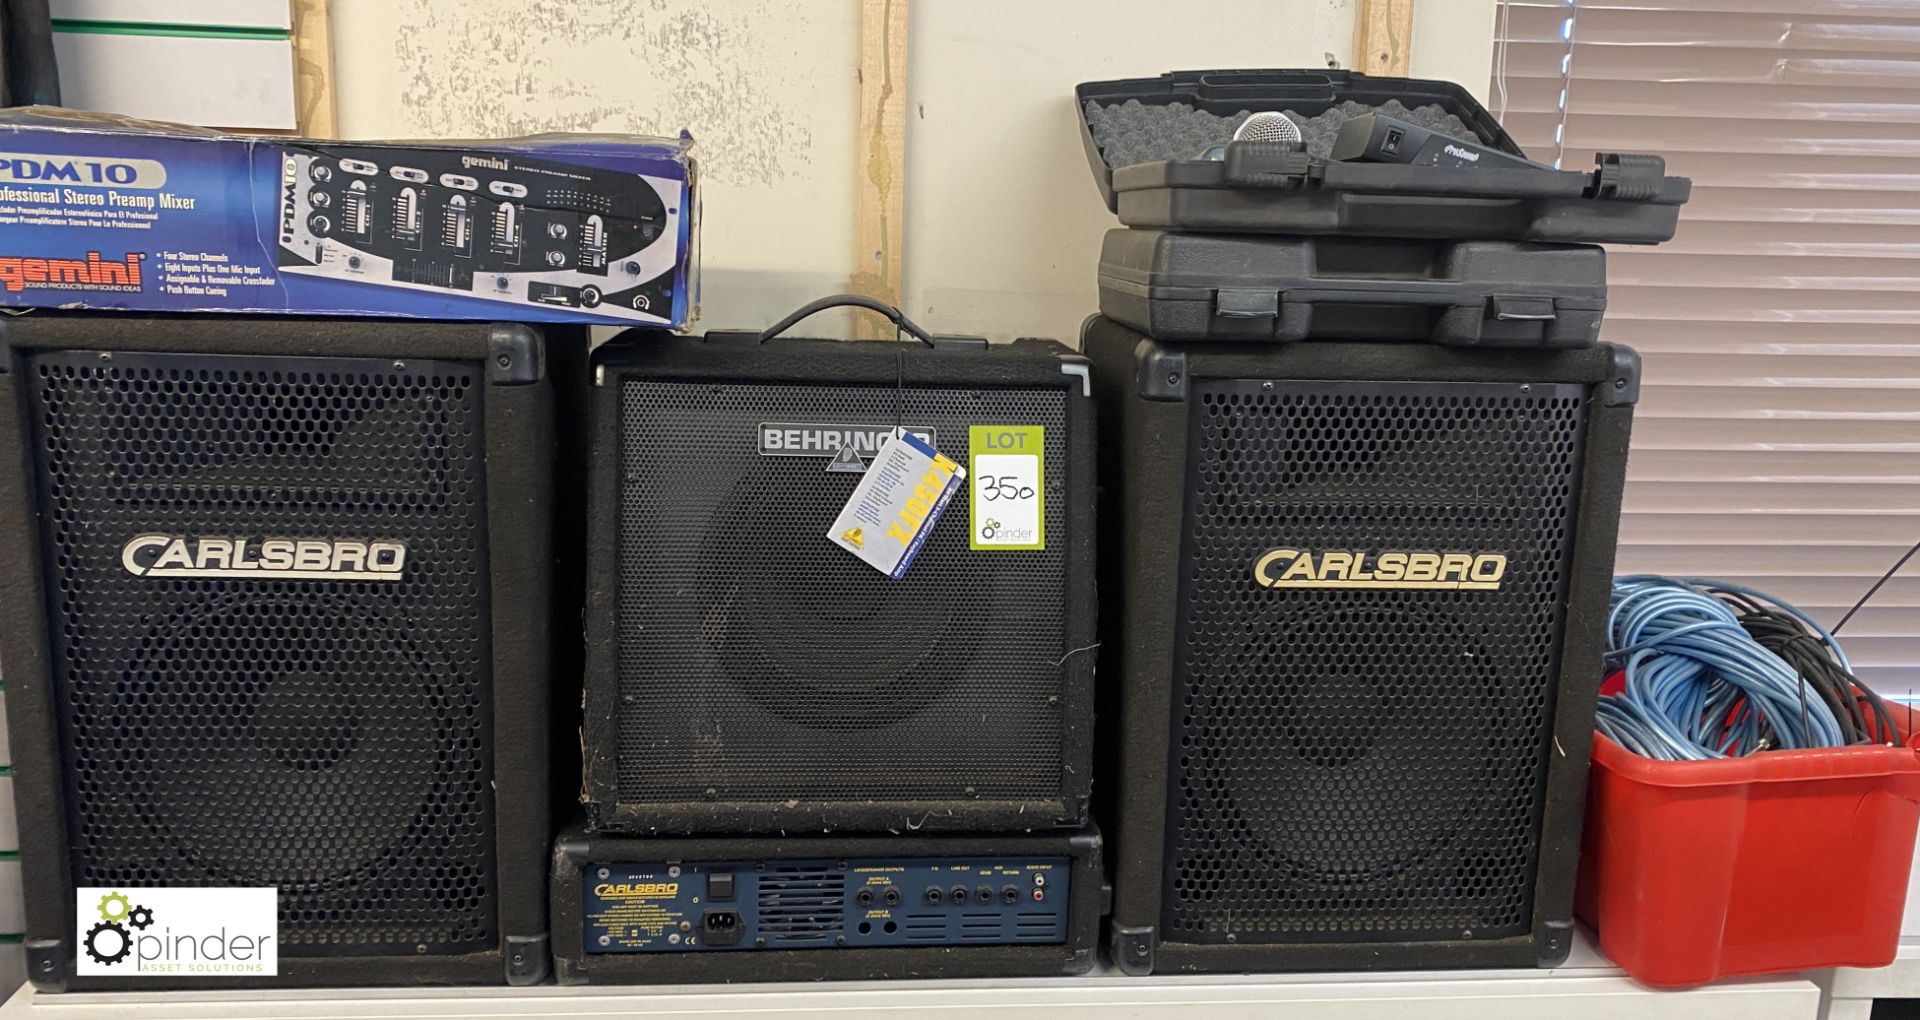 Carlsbro PA System, with 2 speakers, amp, mixer, 2 wireless microphones and cables (LOCATION: